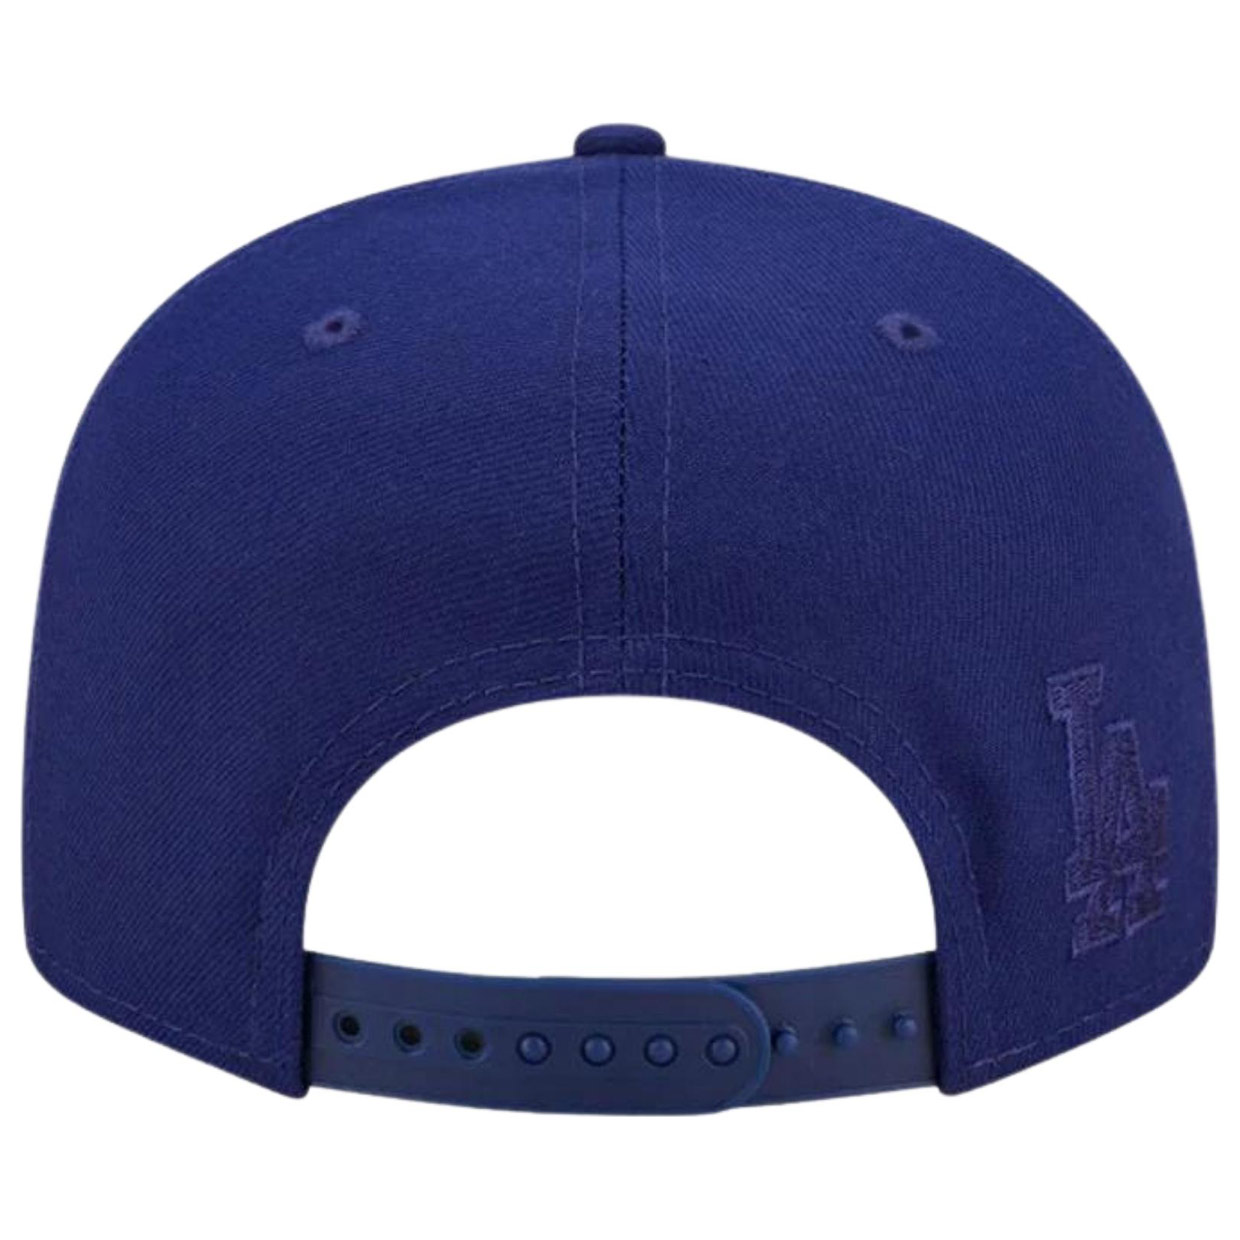 Kappe Los Angeles Dodgers Typography 9FIFTY Snapback